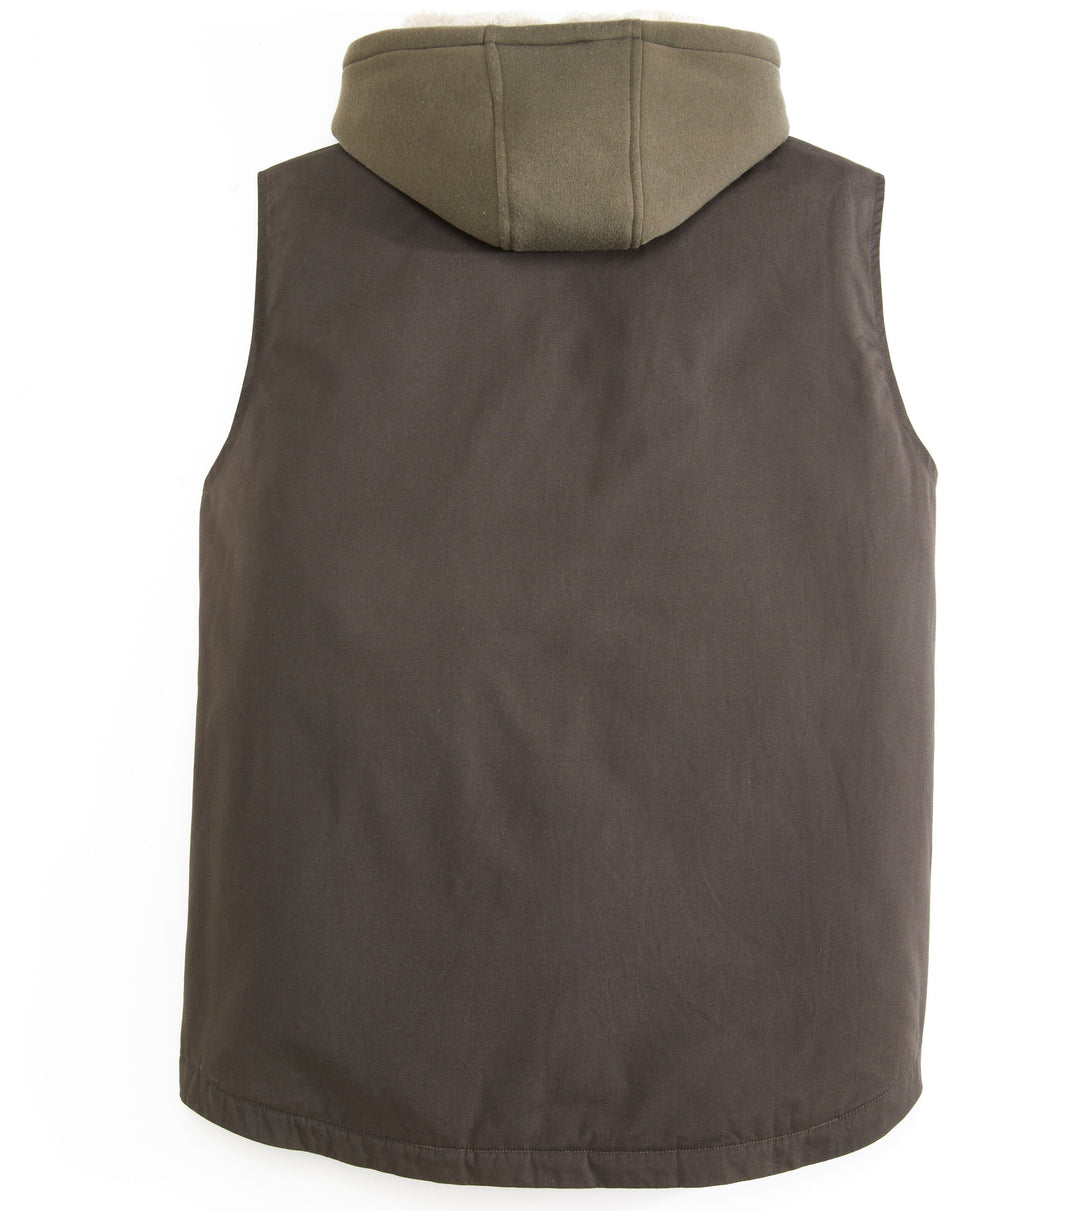 Yukon Trail Concealed Carry Hooded Vest Mens Outerwear Venado 